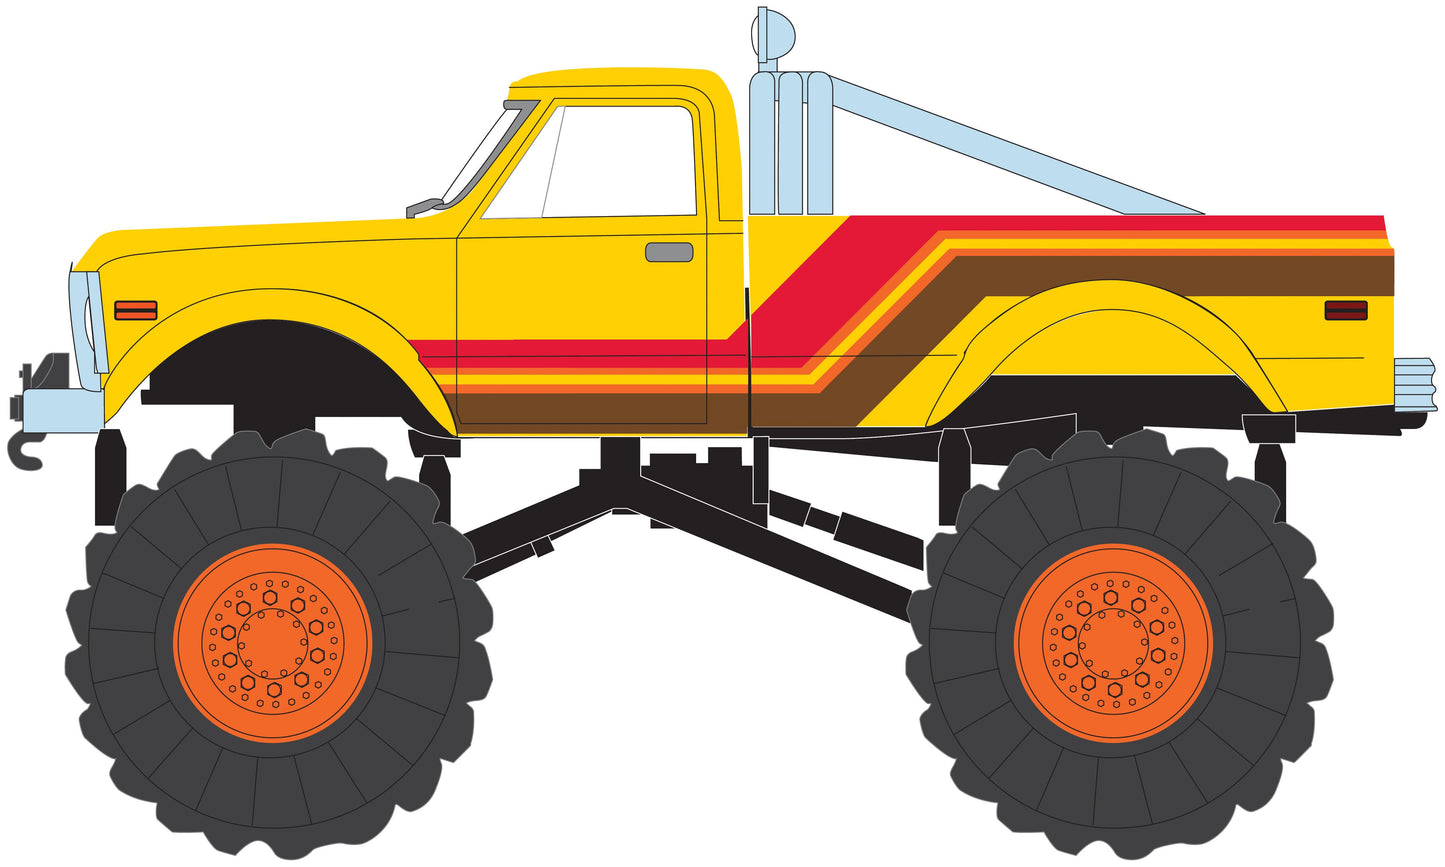 1971 Chevy K-10 Monster Truck (Yellow w/Red/Orange/Brown Stripes)